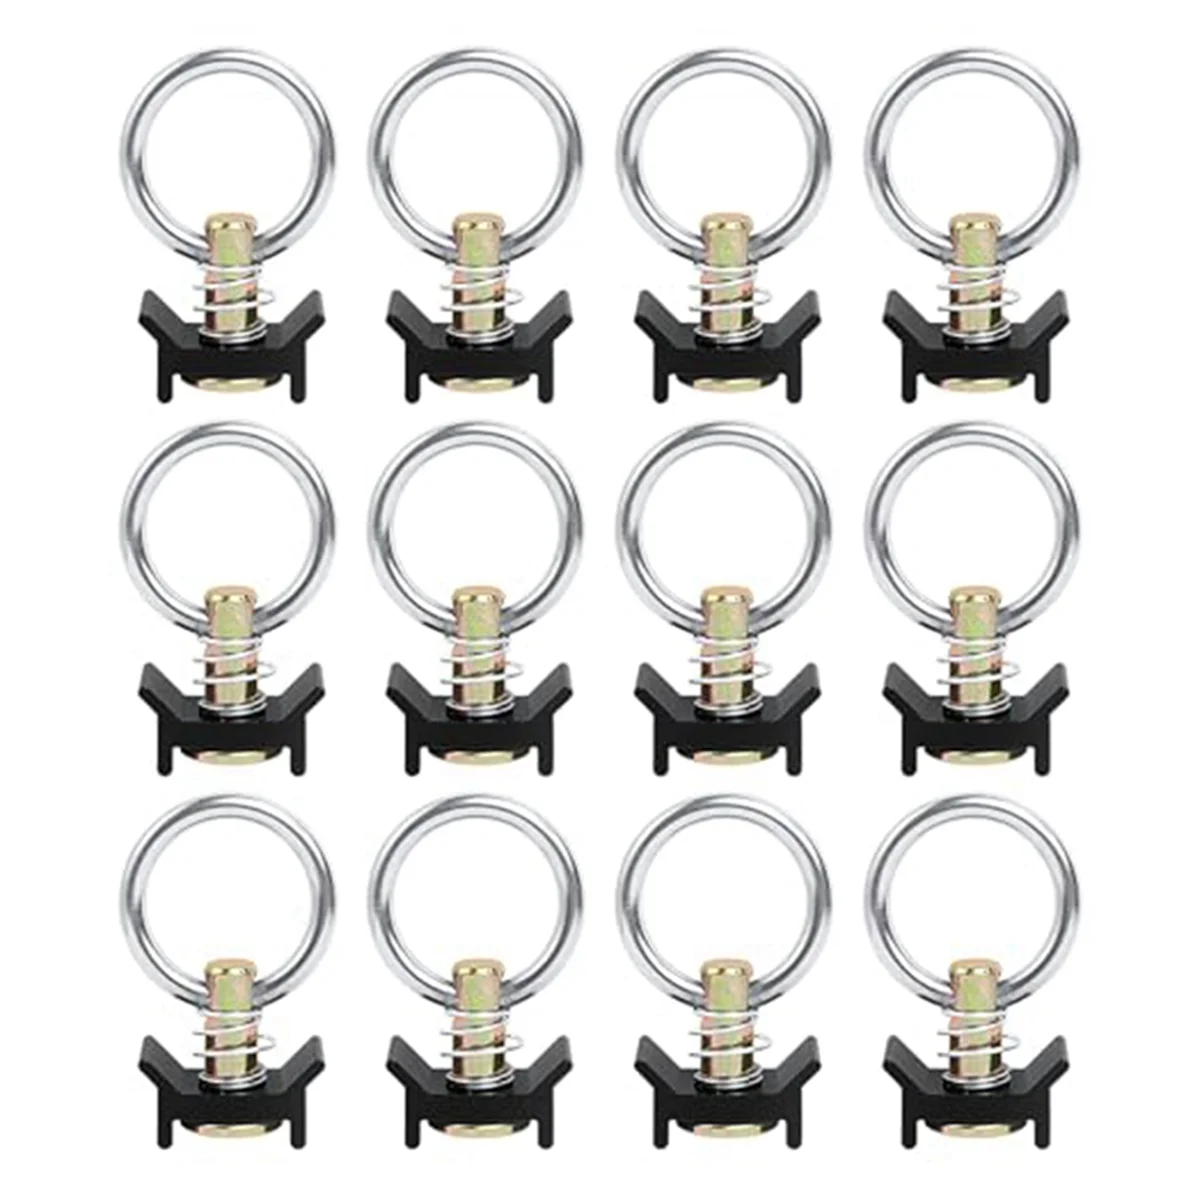 

12PCS Single Stud Fitting L Track 4,000LB Capacity with Stainless Steel Round Ring Aluminum Keeper Cargo Control,Black